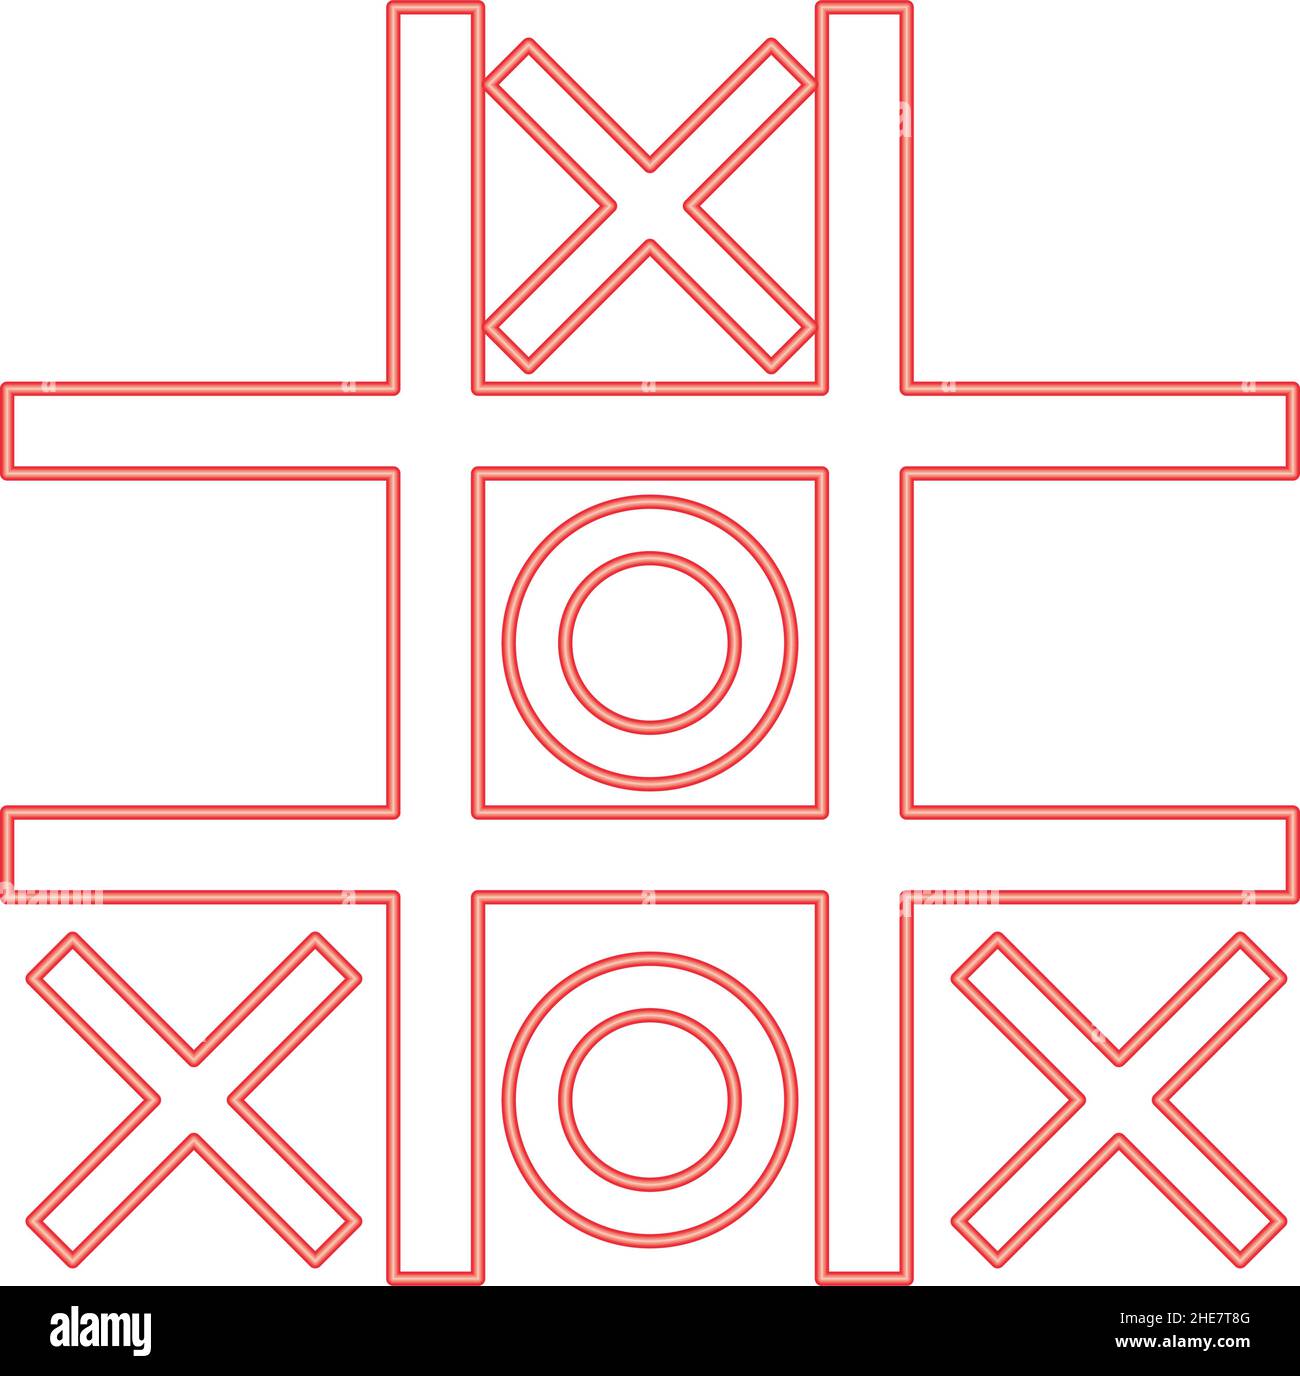 Glowing neon line tic tac toe game icon isolated Vector Image